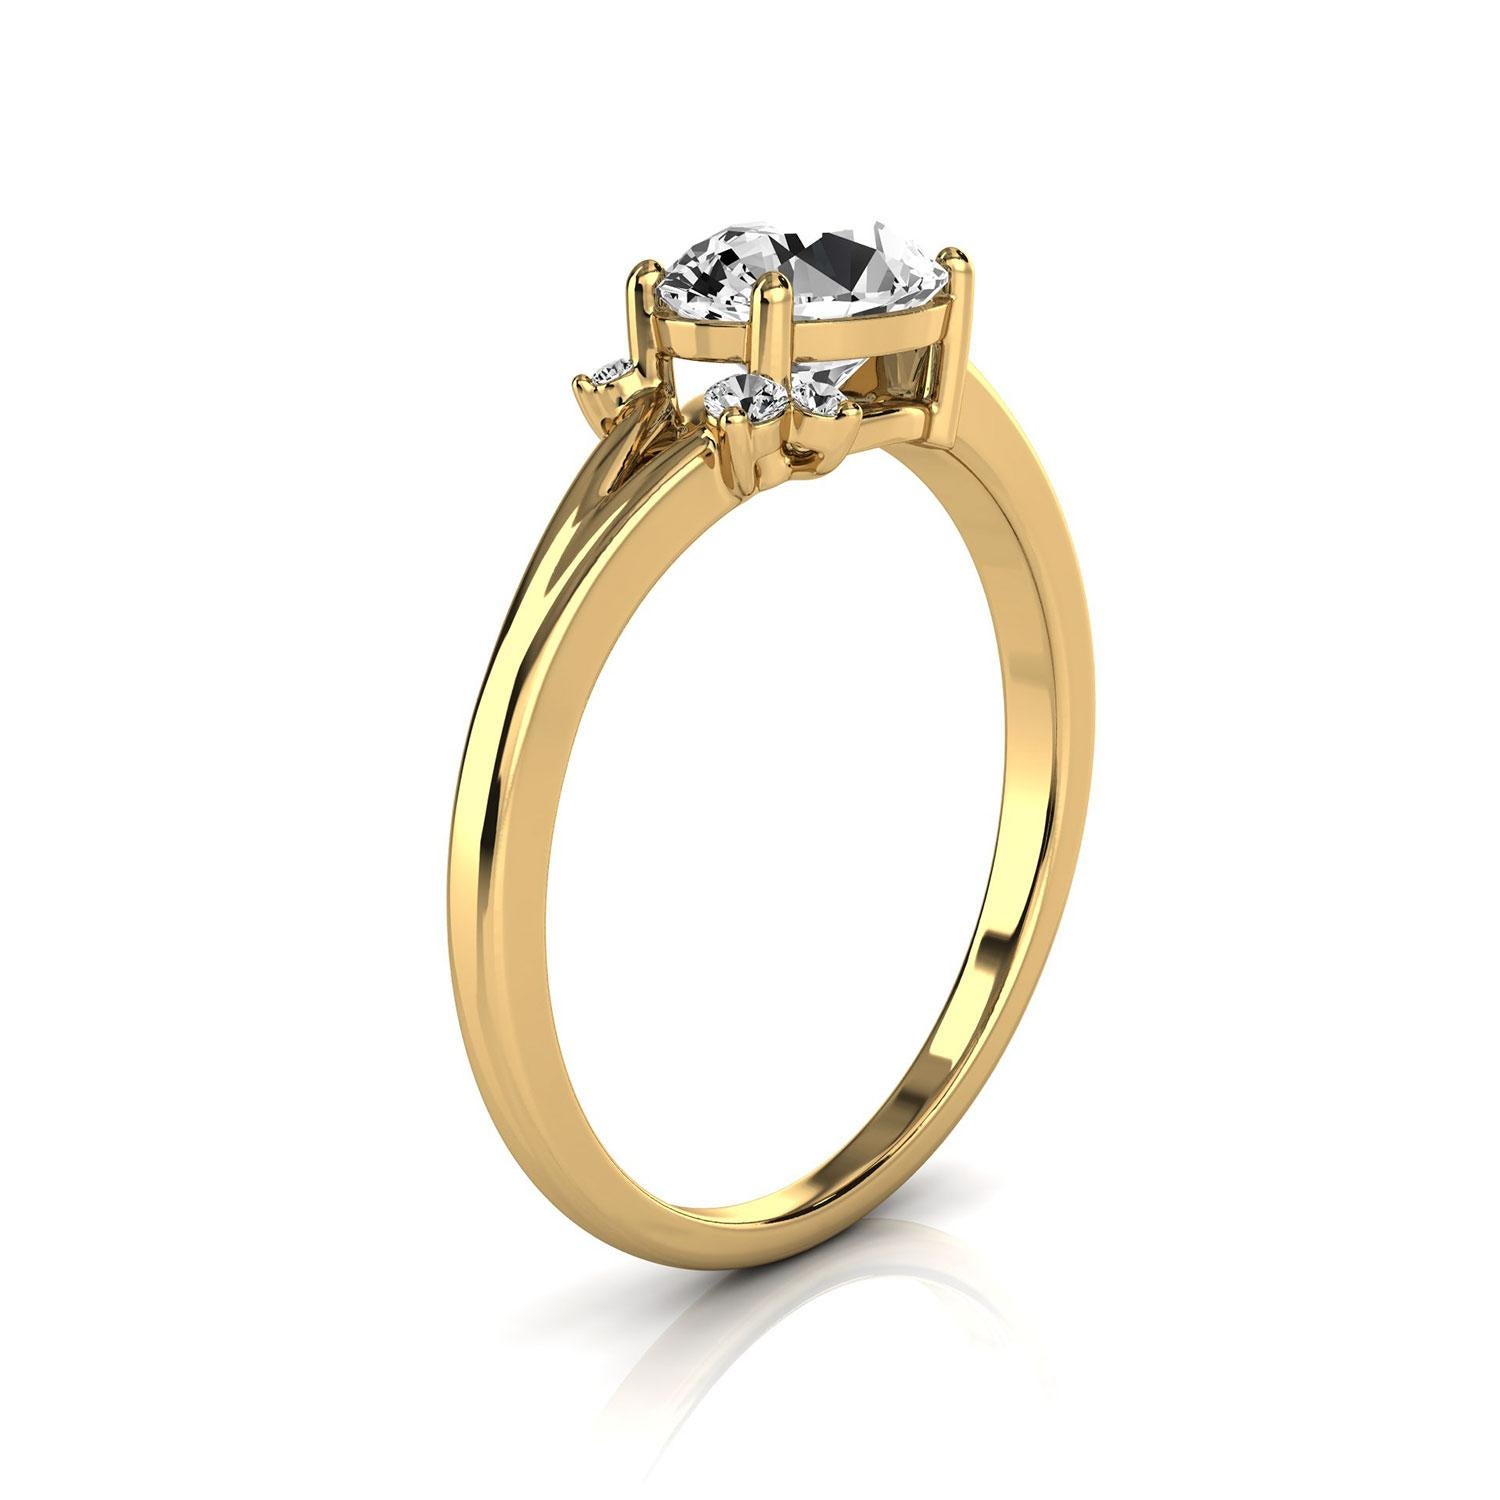 This petite handcrafted earthy, organically designed ring features an Oval shape diamond in total carat weight of 3/4 of a carat, complimented by three (3) round diamonds in a total weight of 0.03 carat, adding to its rustic style. Experience the